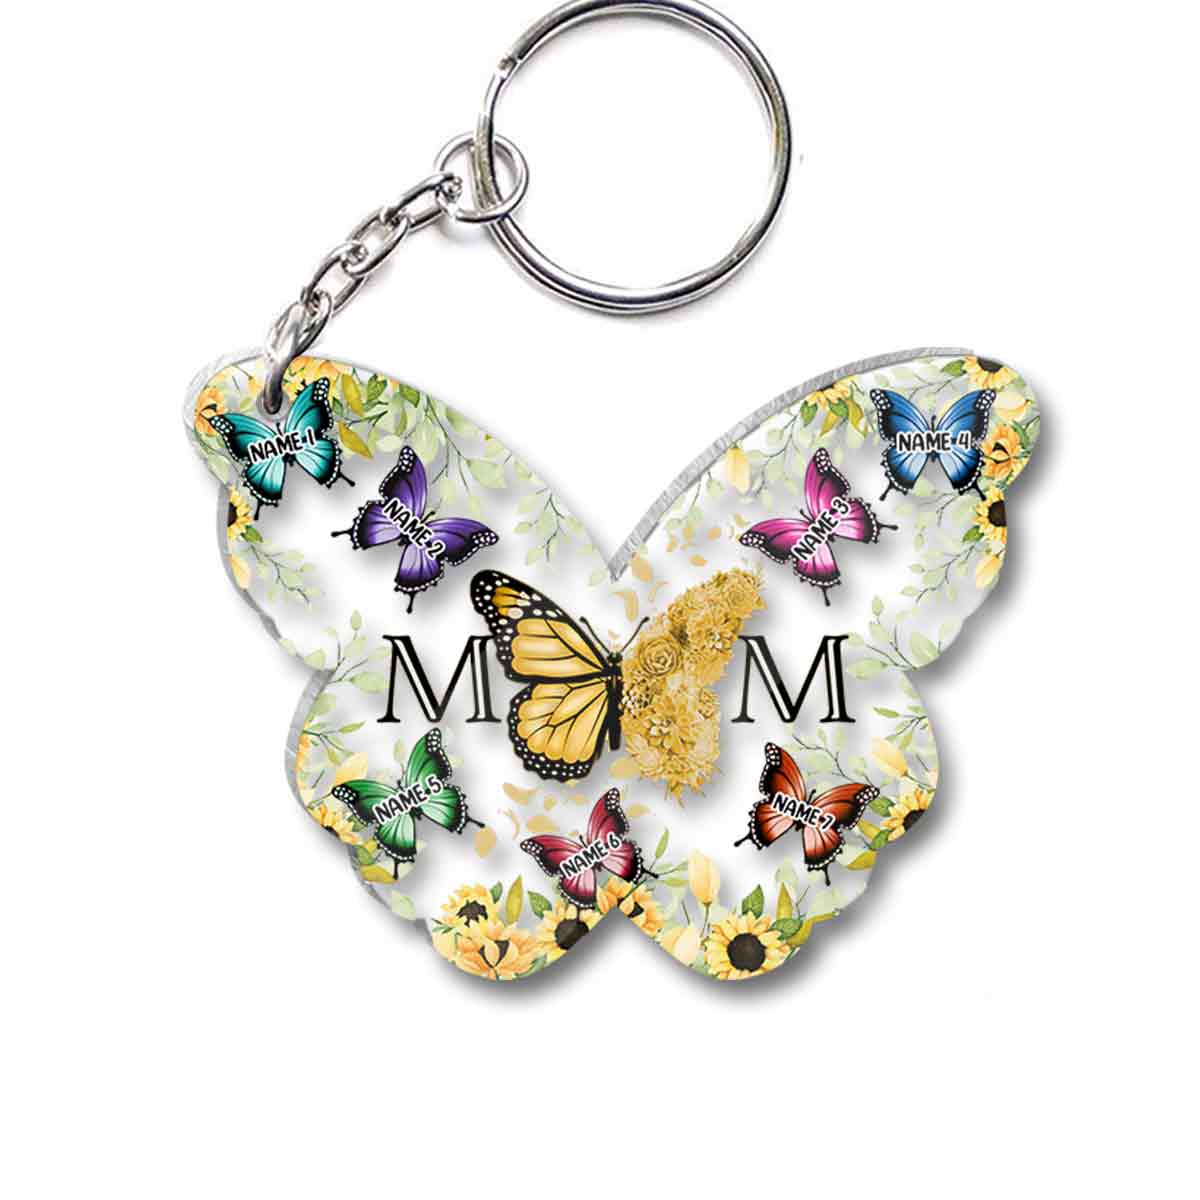 Mom Butterfly - Personalized Mother Transparent Transparent Keychain